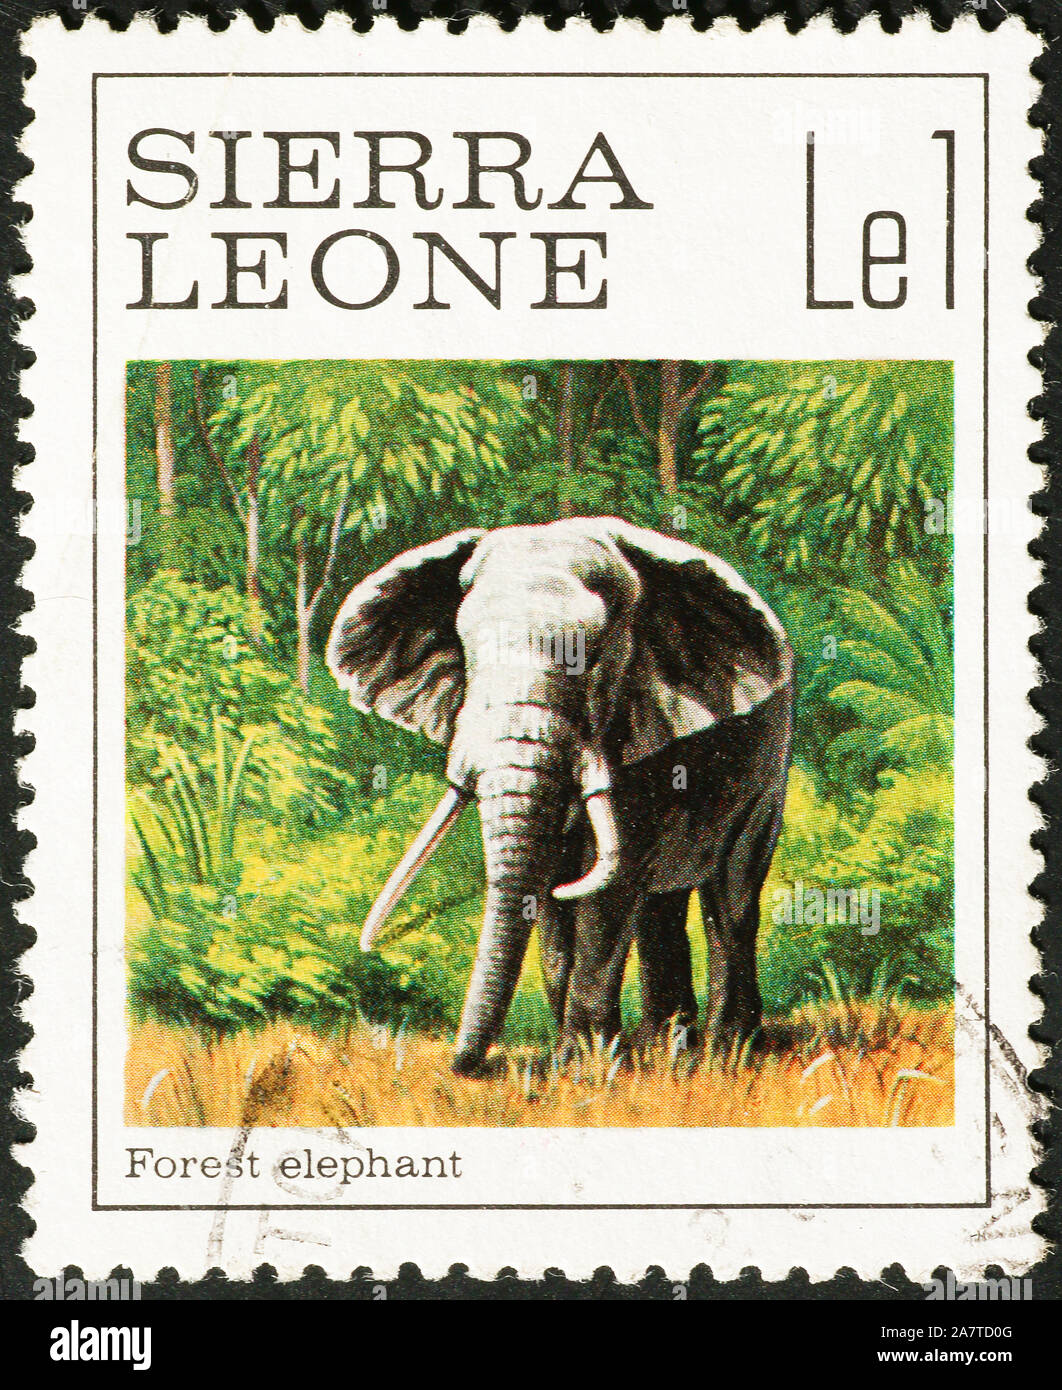 Forest elephant on postage stamp of Sierra Leone Stock Photo